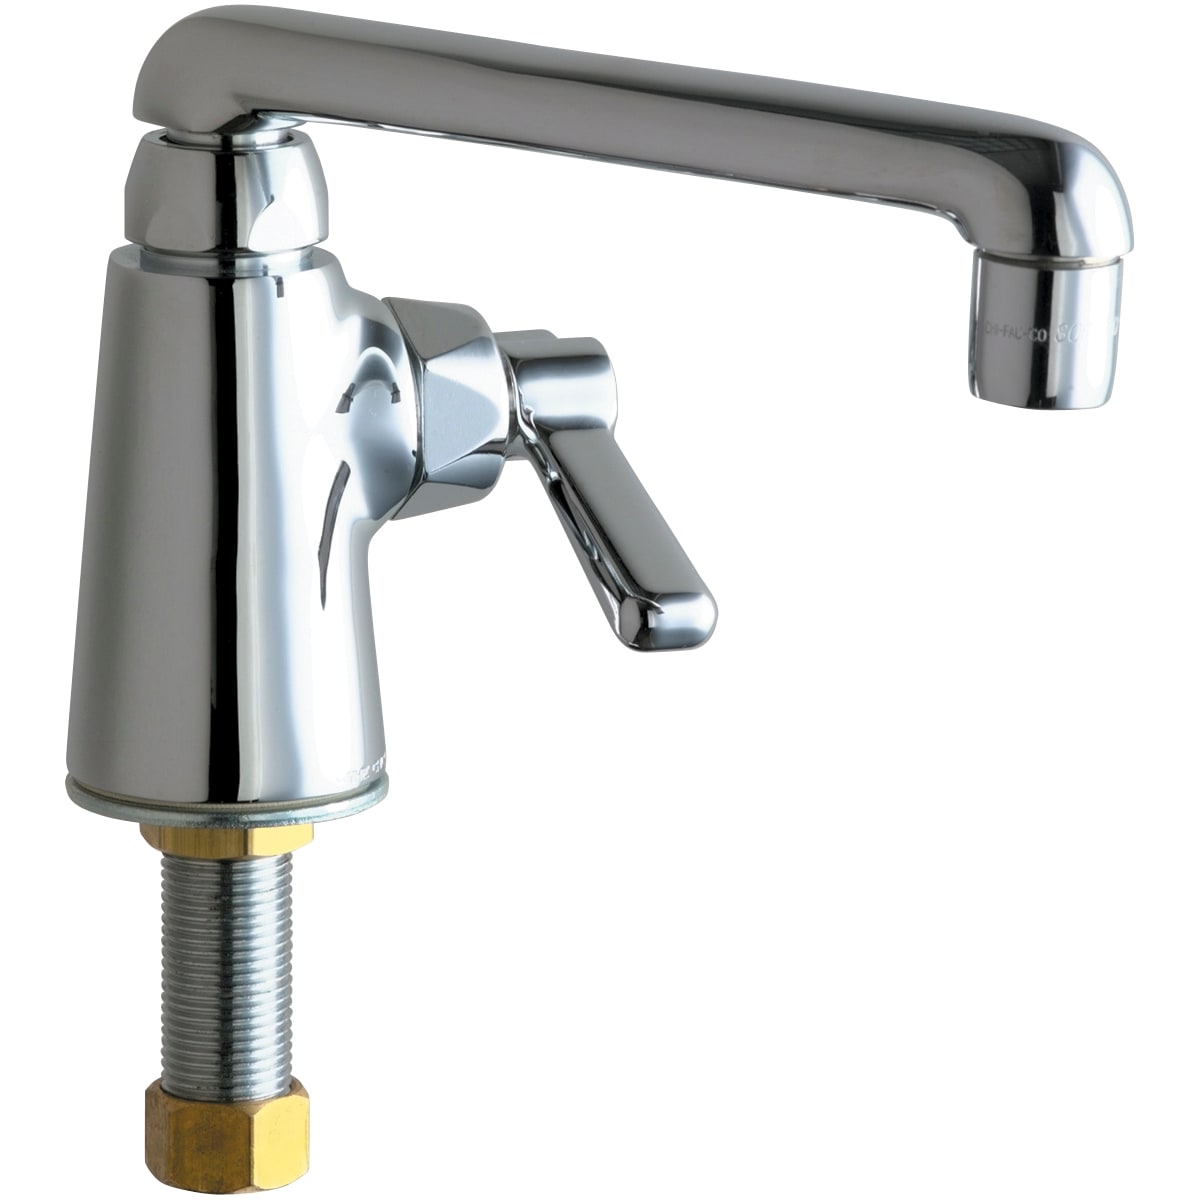 Chicago Faucets 349 Abcp Chrome Commercial Grade Single Hole